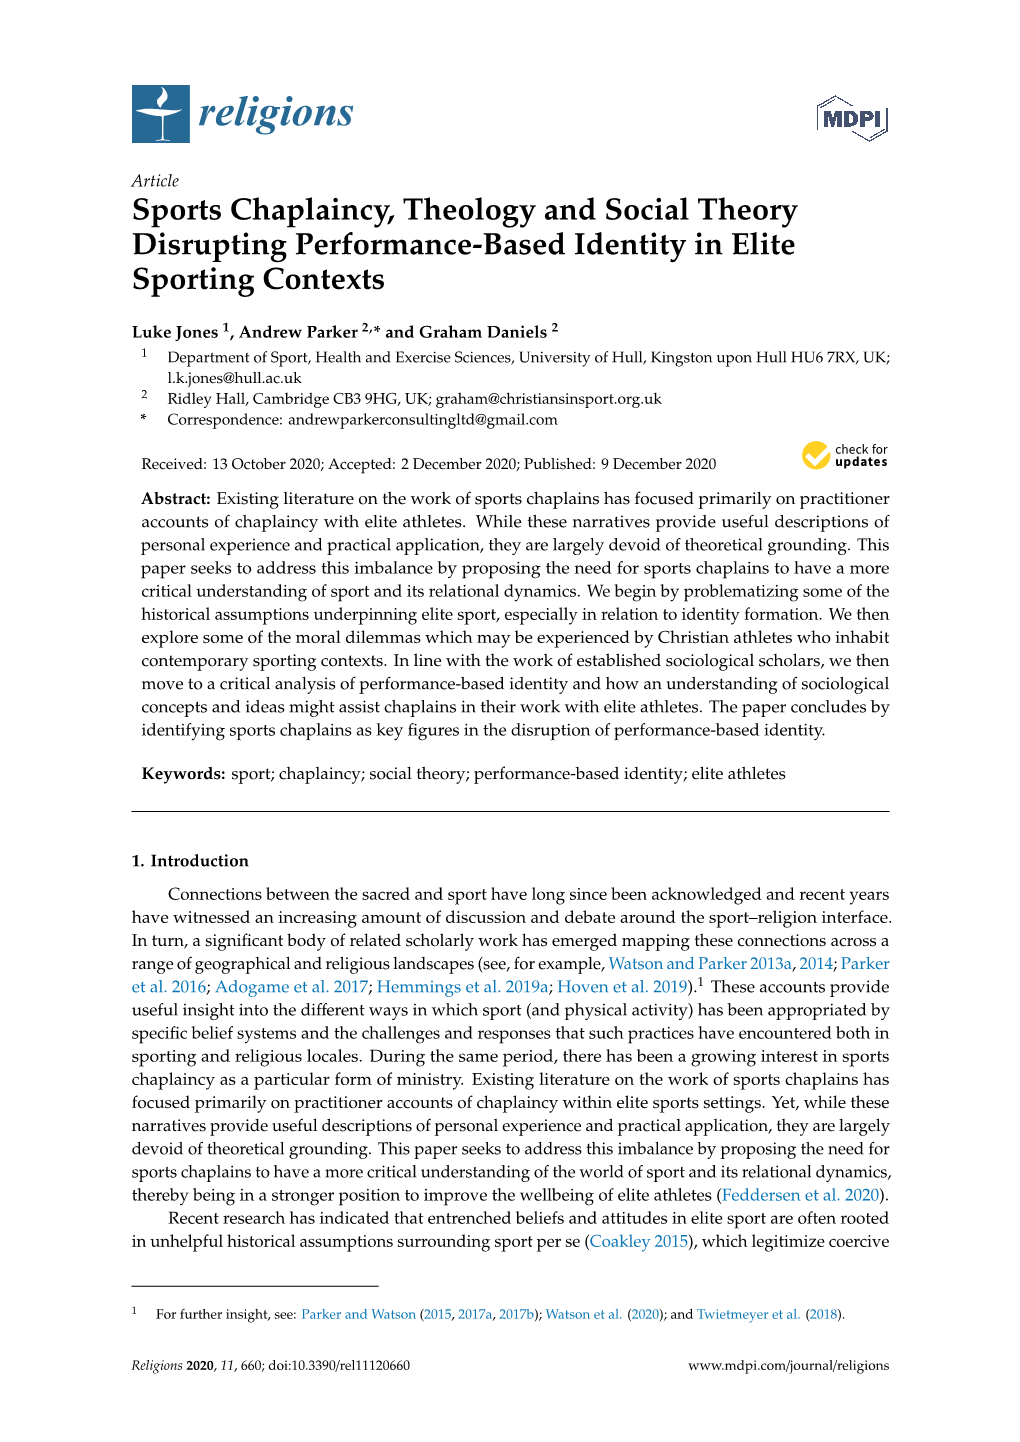 Sports Chaplaincy, Theology and Social Theory Disrupting Performance-Based Identity in Elite Sporting Contexts